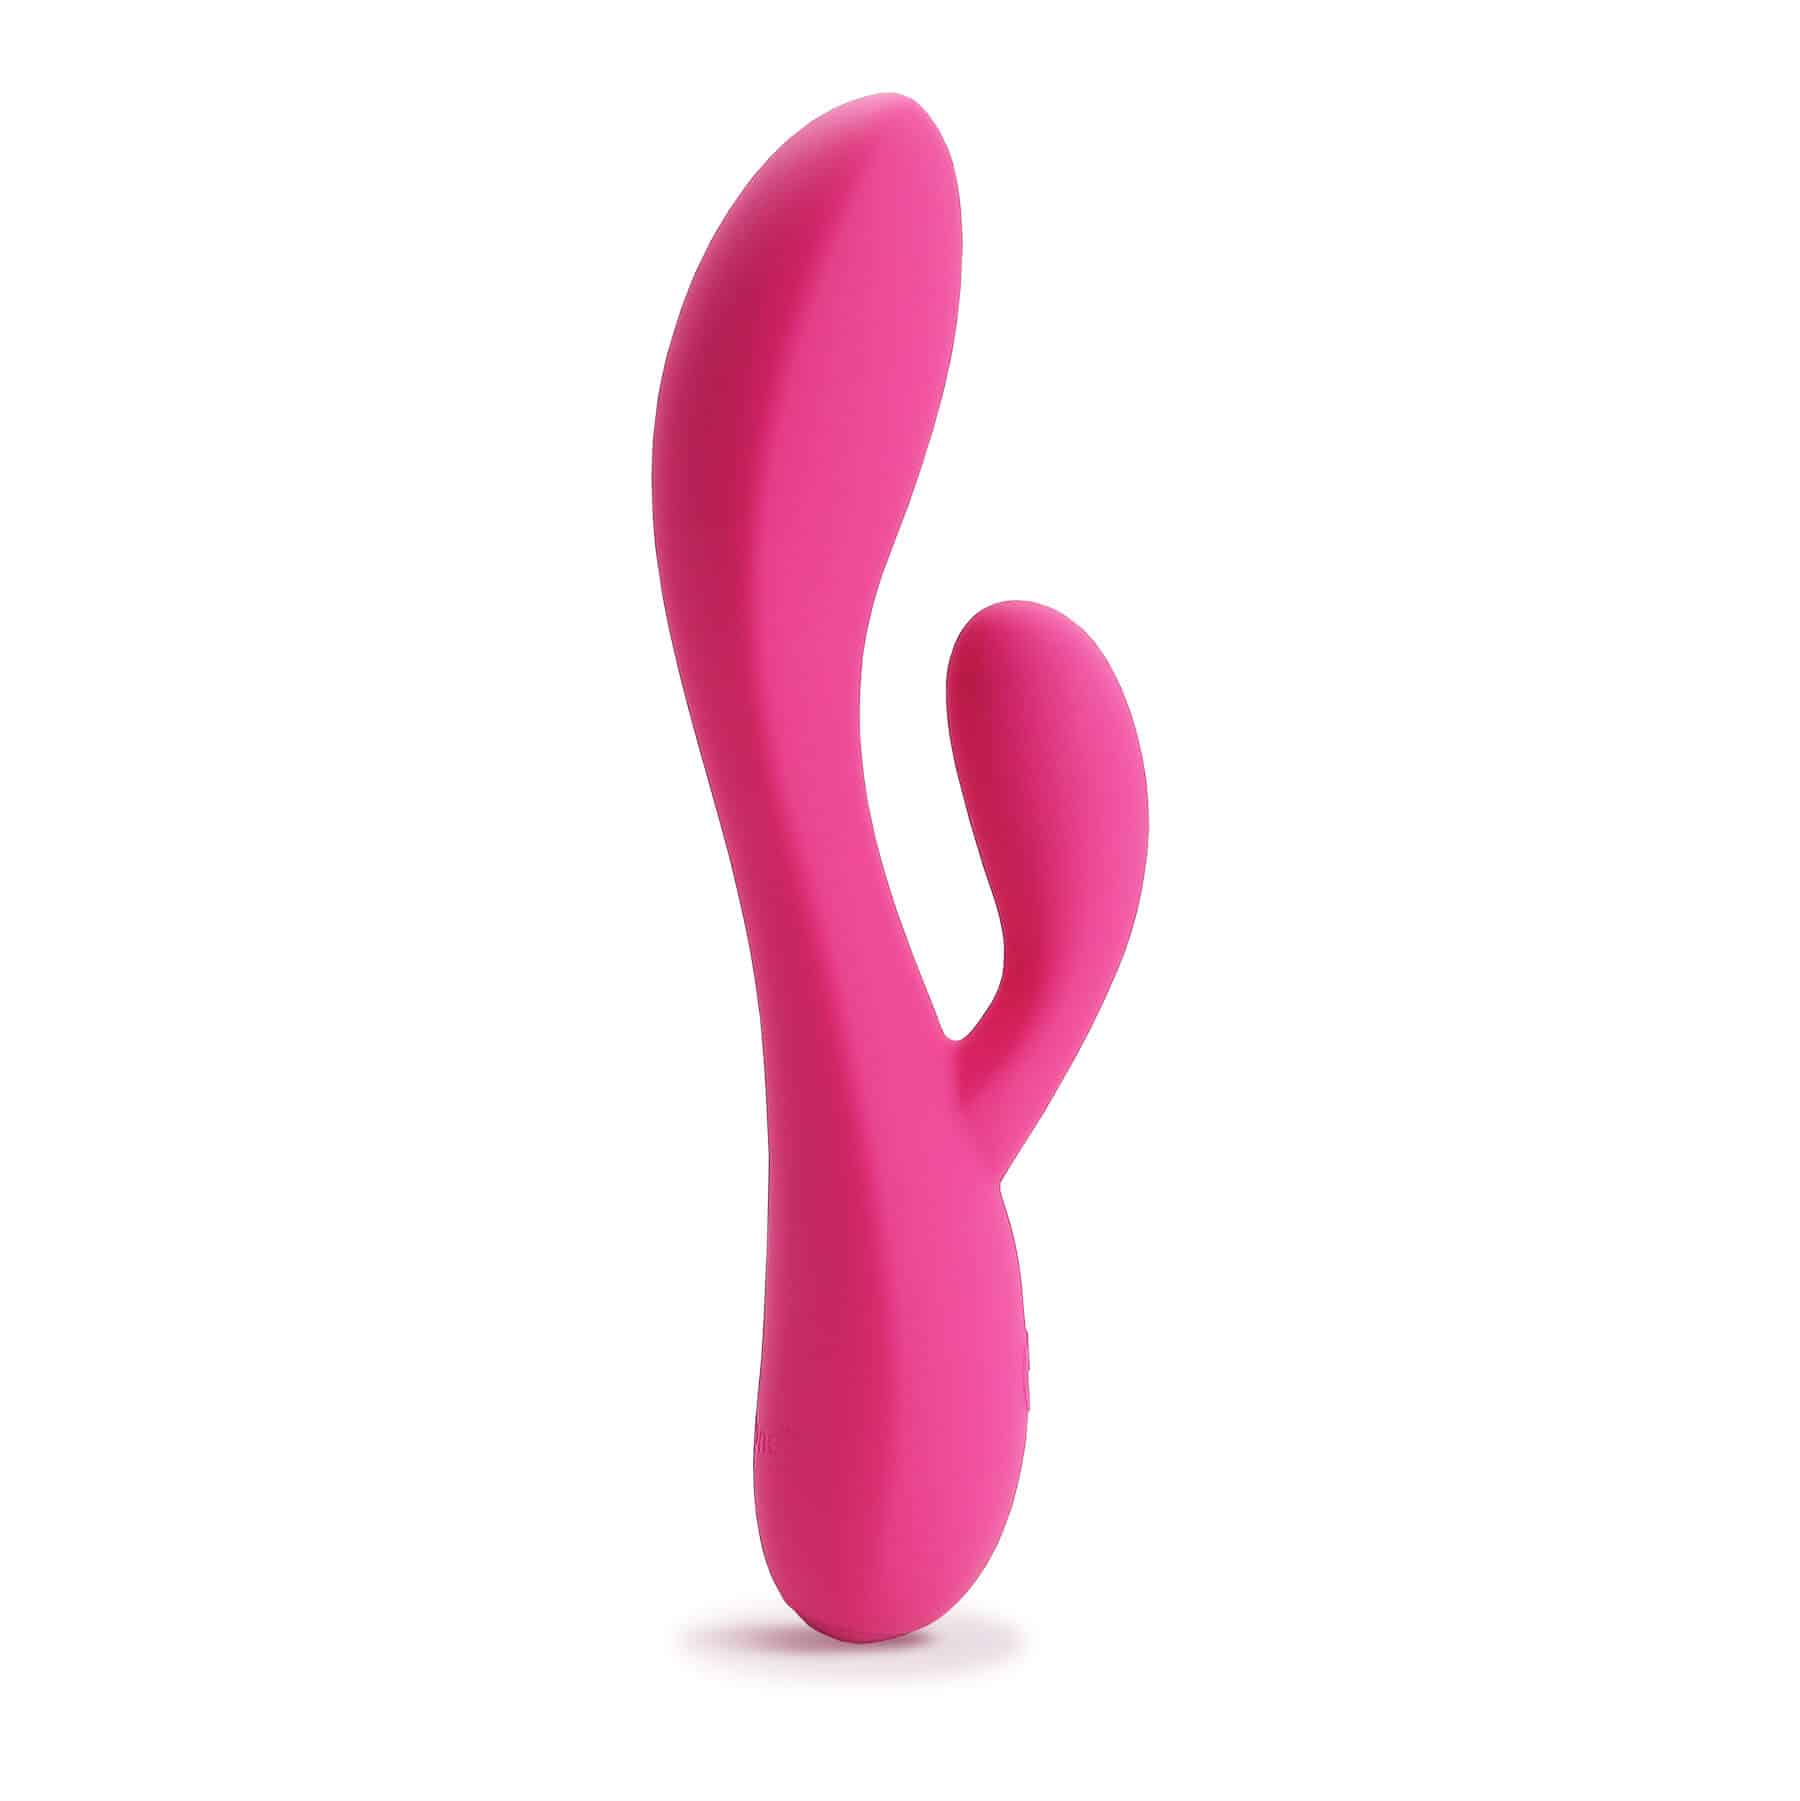 7 Strong Vibrations Without Charging-100% Waterproof Safety Silicone